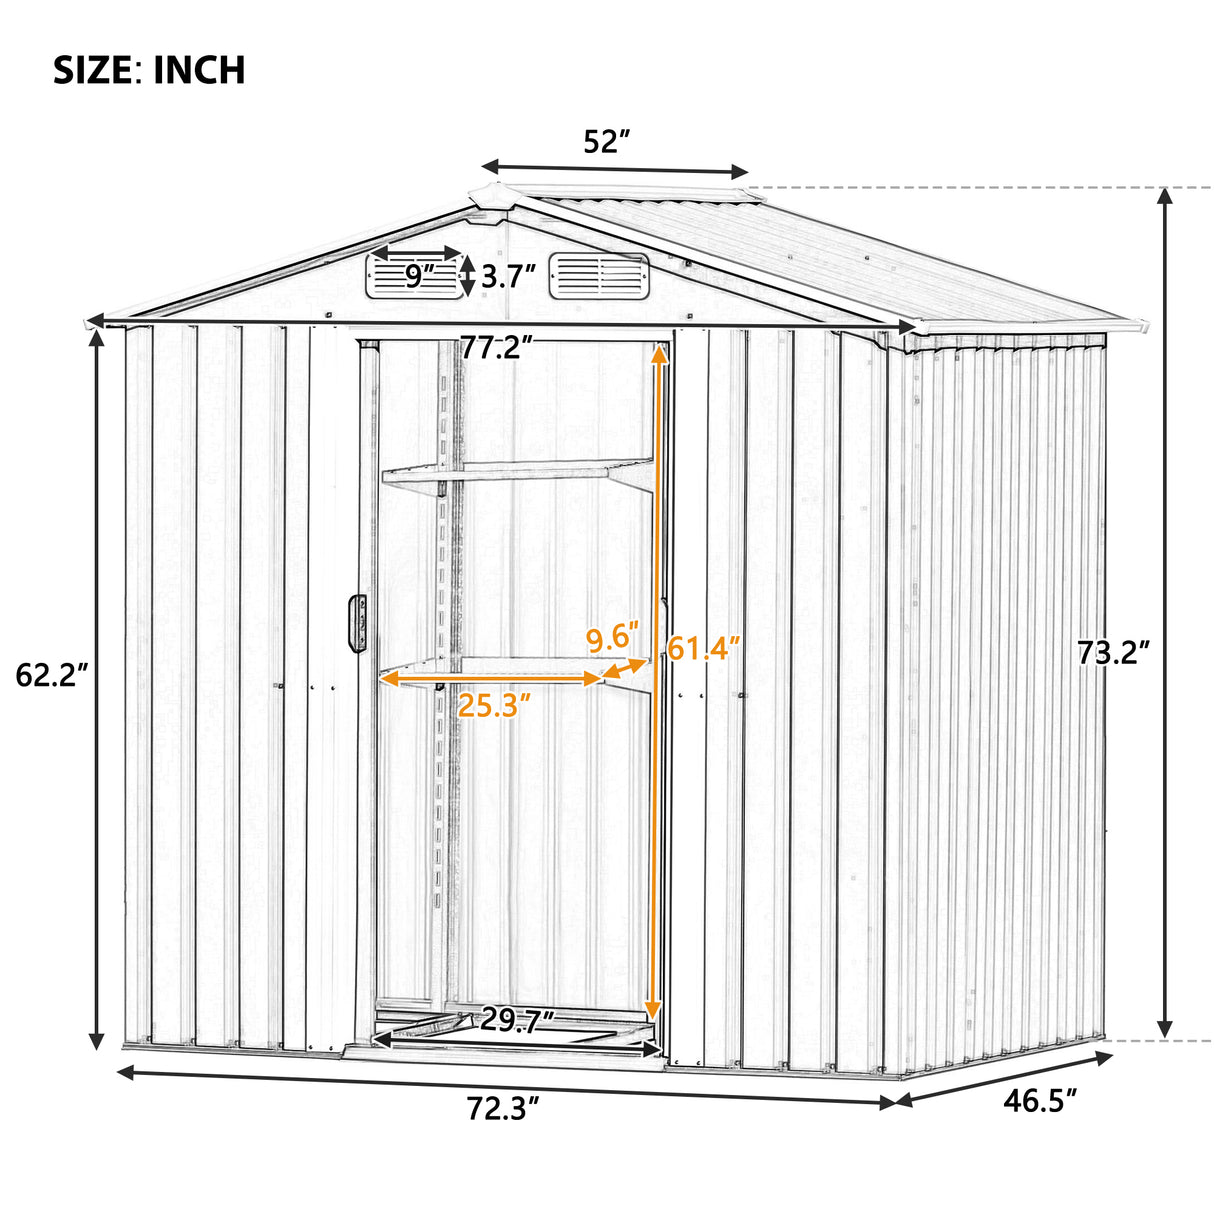 TOPMAX Patio 6ft x4ft Bike Shed Garden Shed, Metal Storage Shed with Adjustable Shelf and Lockable Door, Tool Cabinet with Vents and Foundation for Backyard, Lawn, Garden, Brown